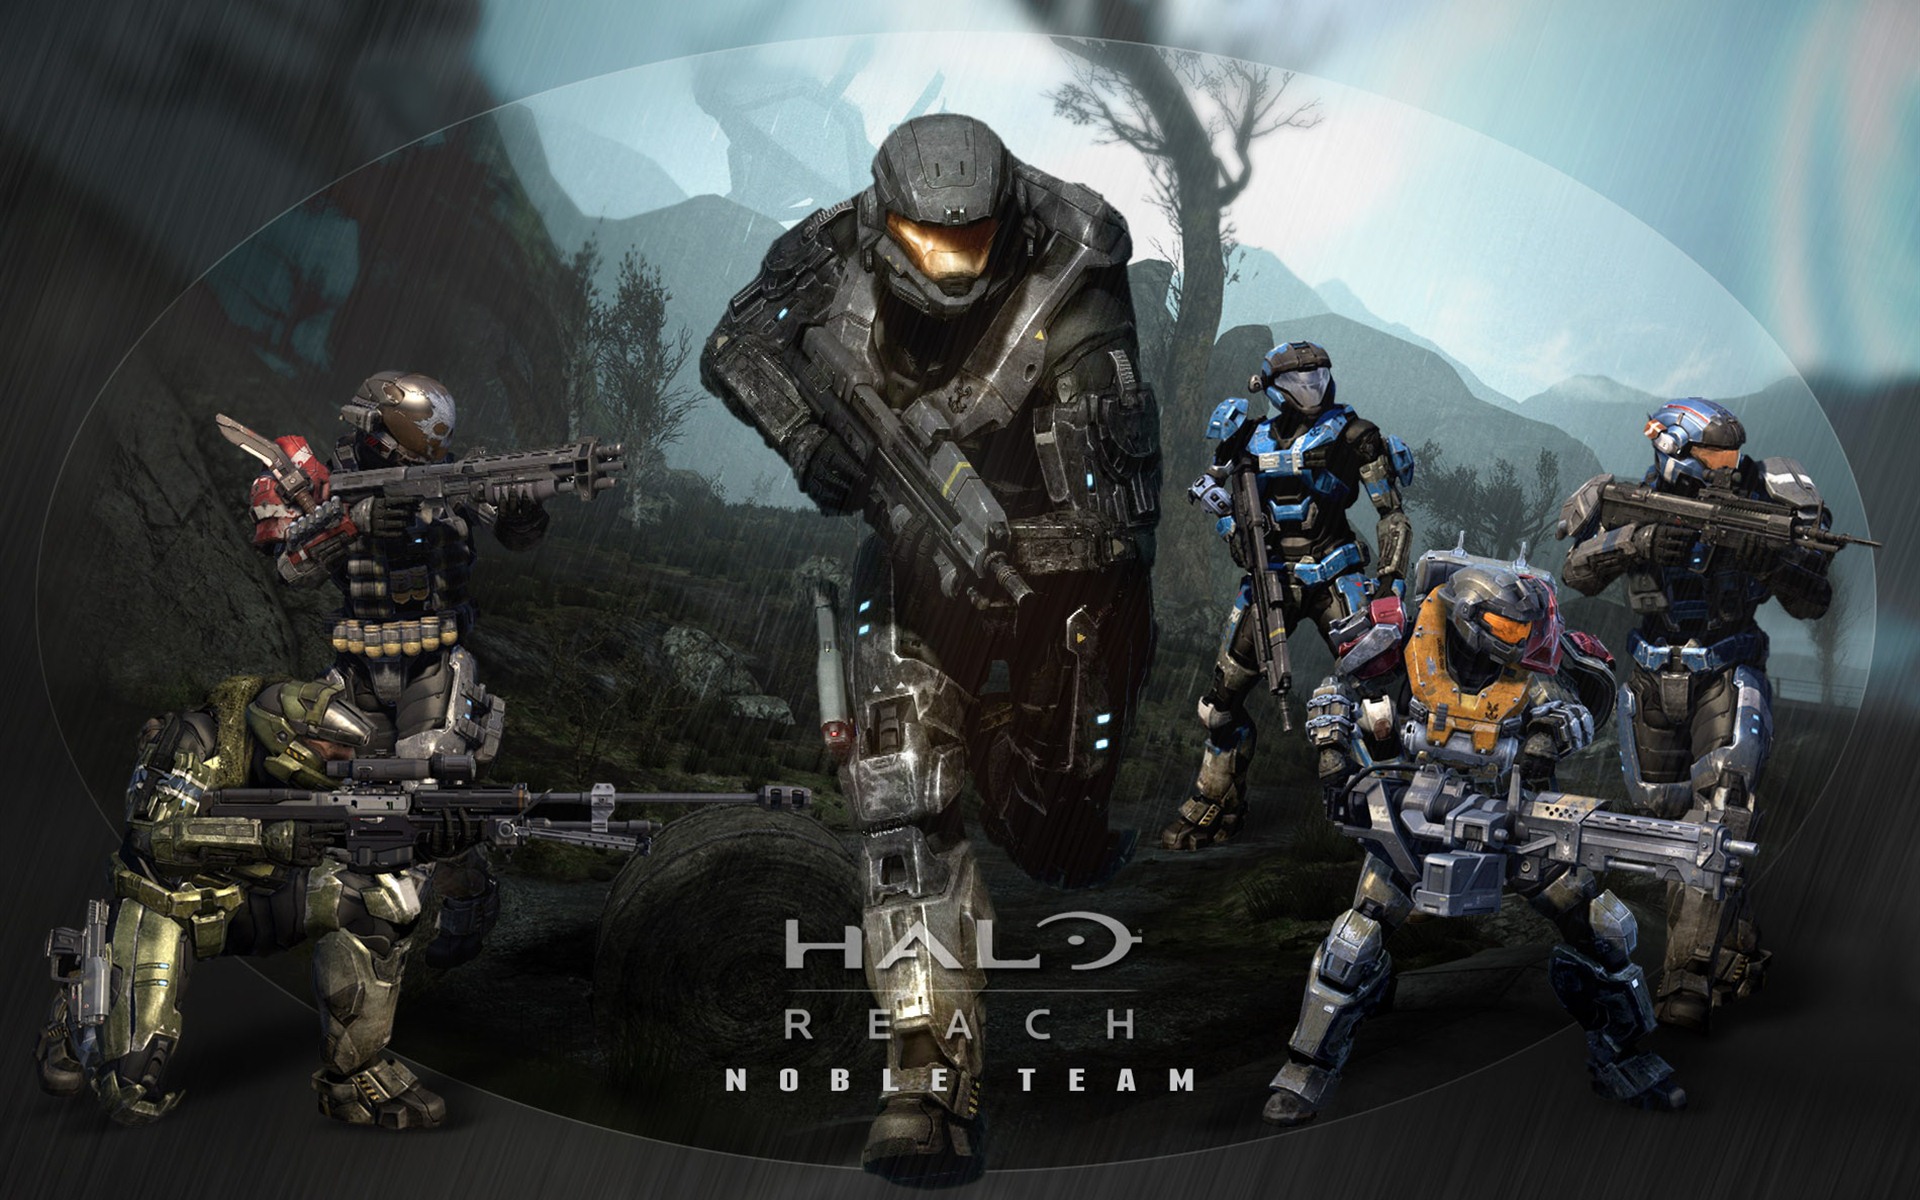 Halo game HD wallpapers #23 - 1920x1200